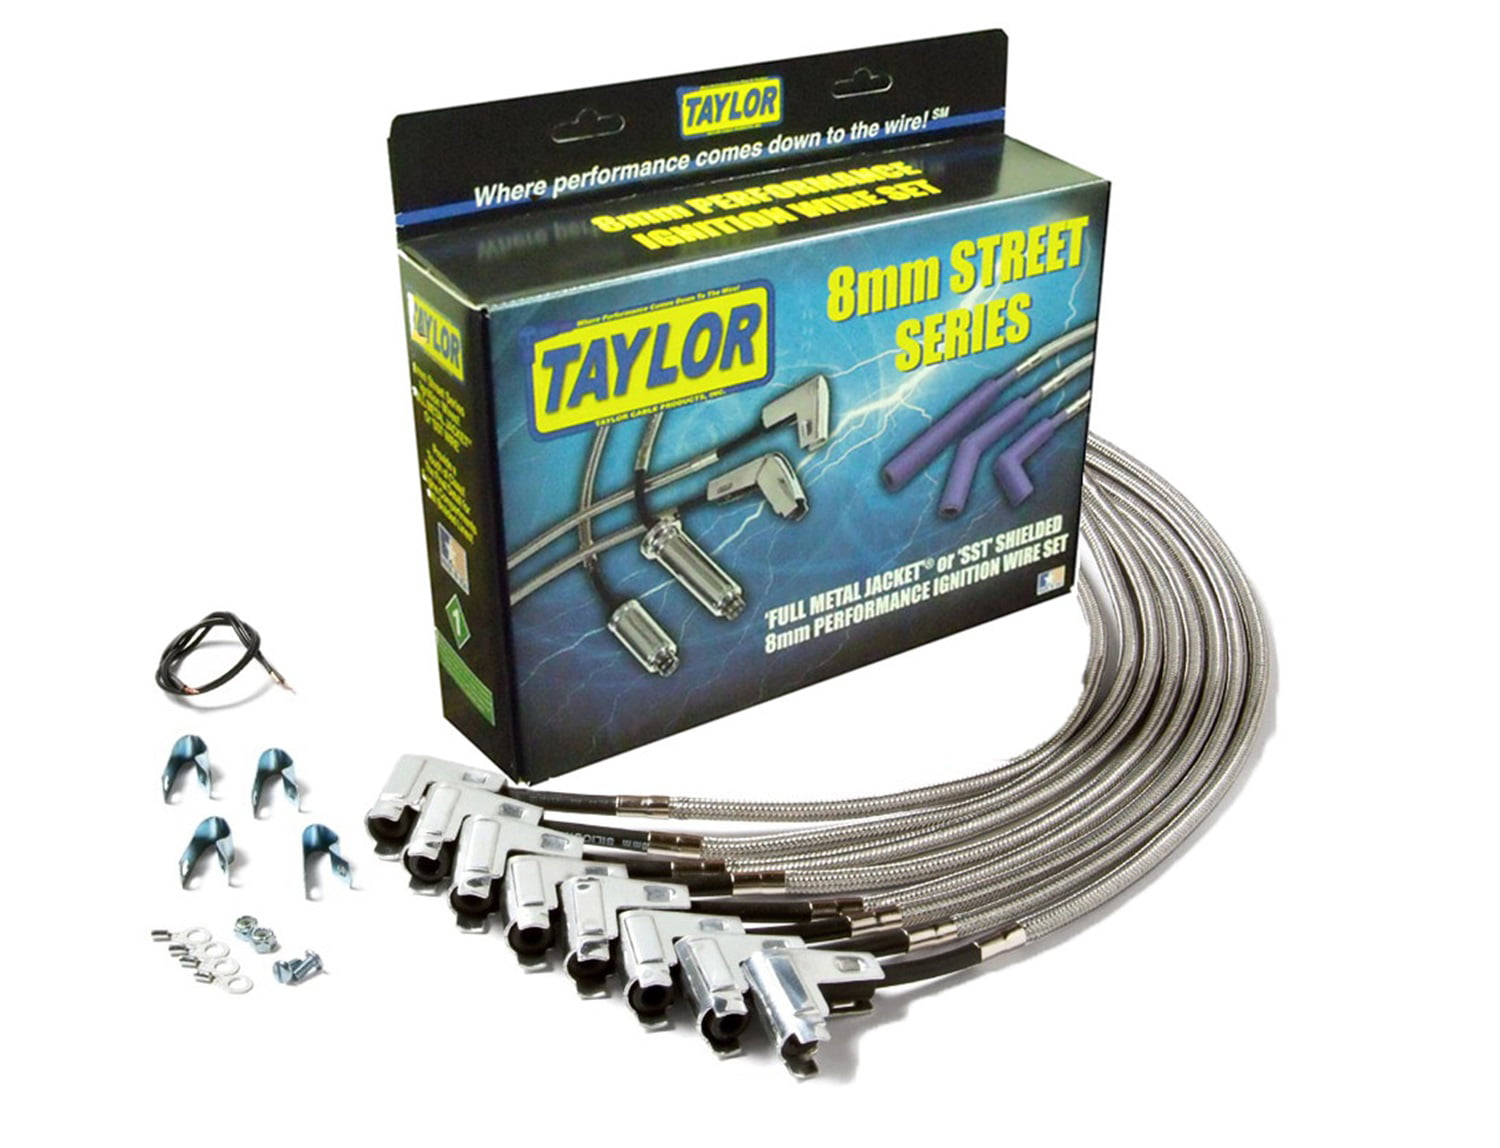 Taylor Spark Plug Wire Set 91002; Full Metal Jacket 8mm Stainless for Chevy V8